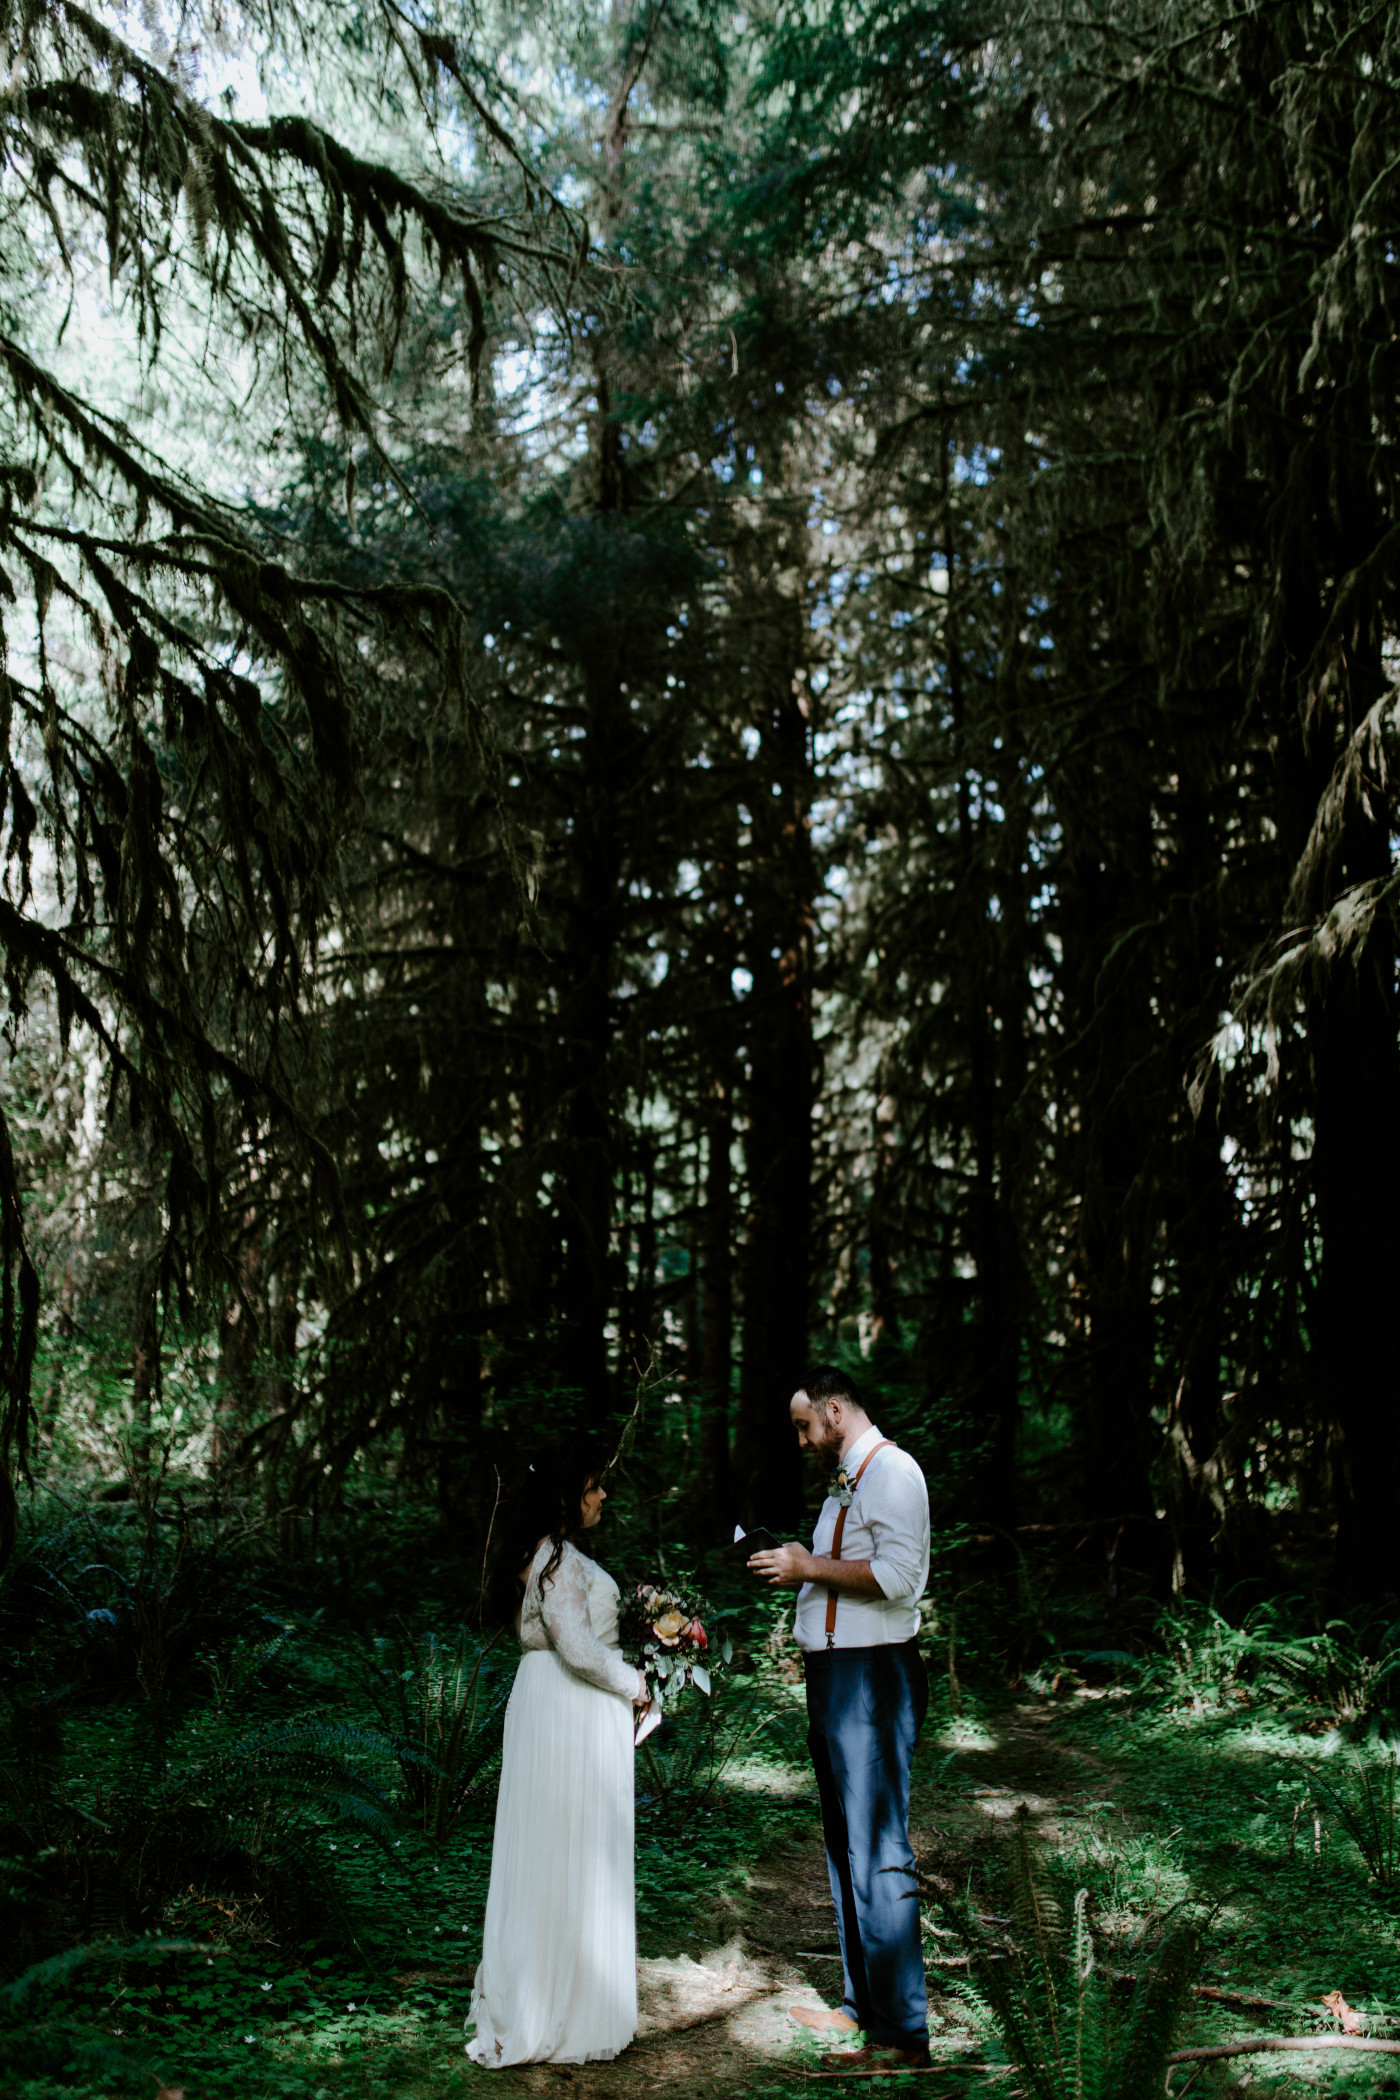 Jack and Brooke reading vows. Elopement photography at Olympic National Park by Sienna Plus Josh.